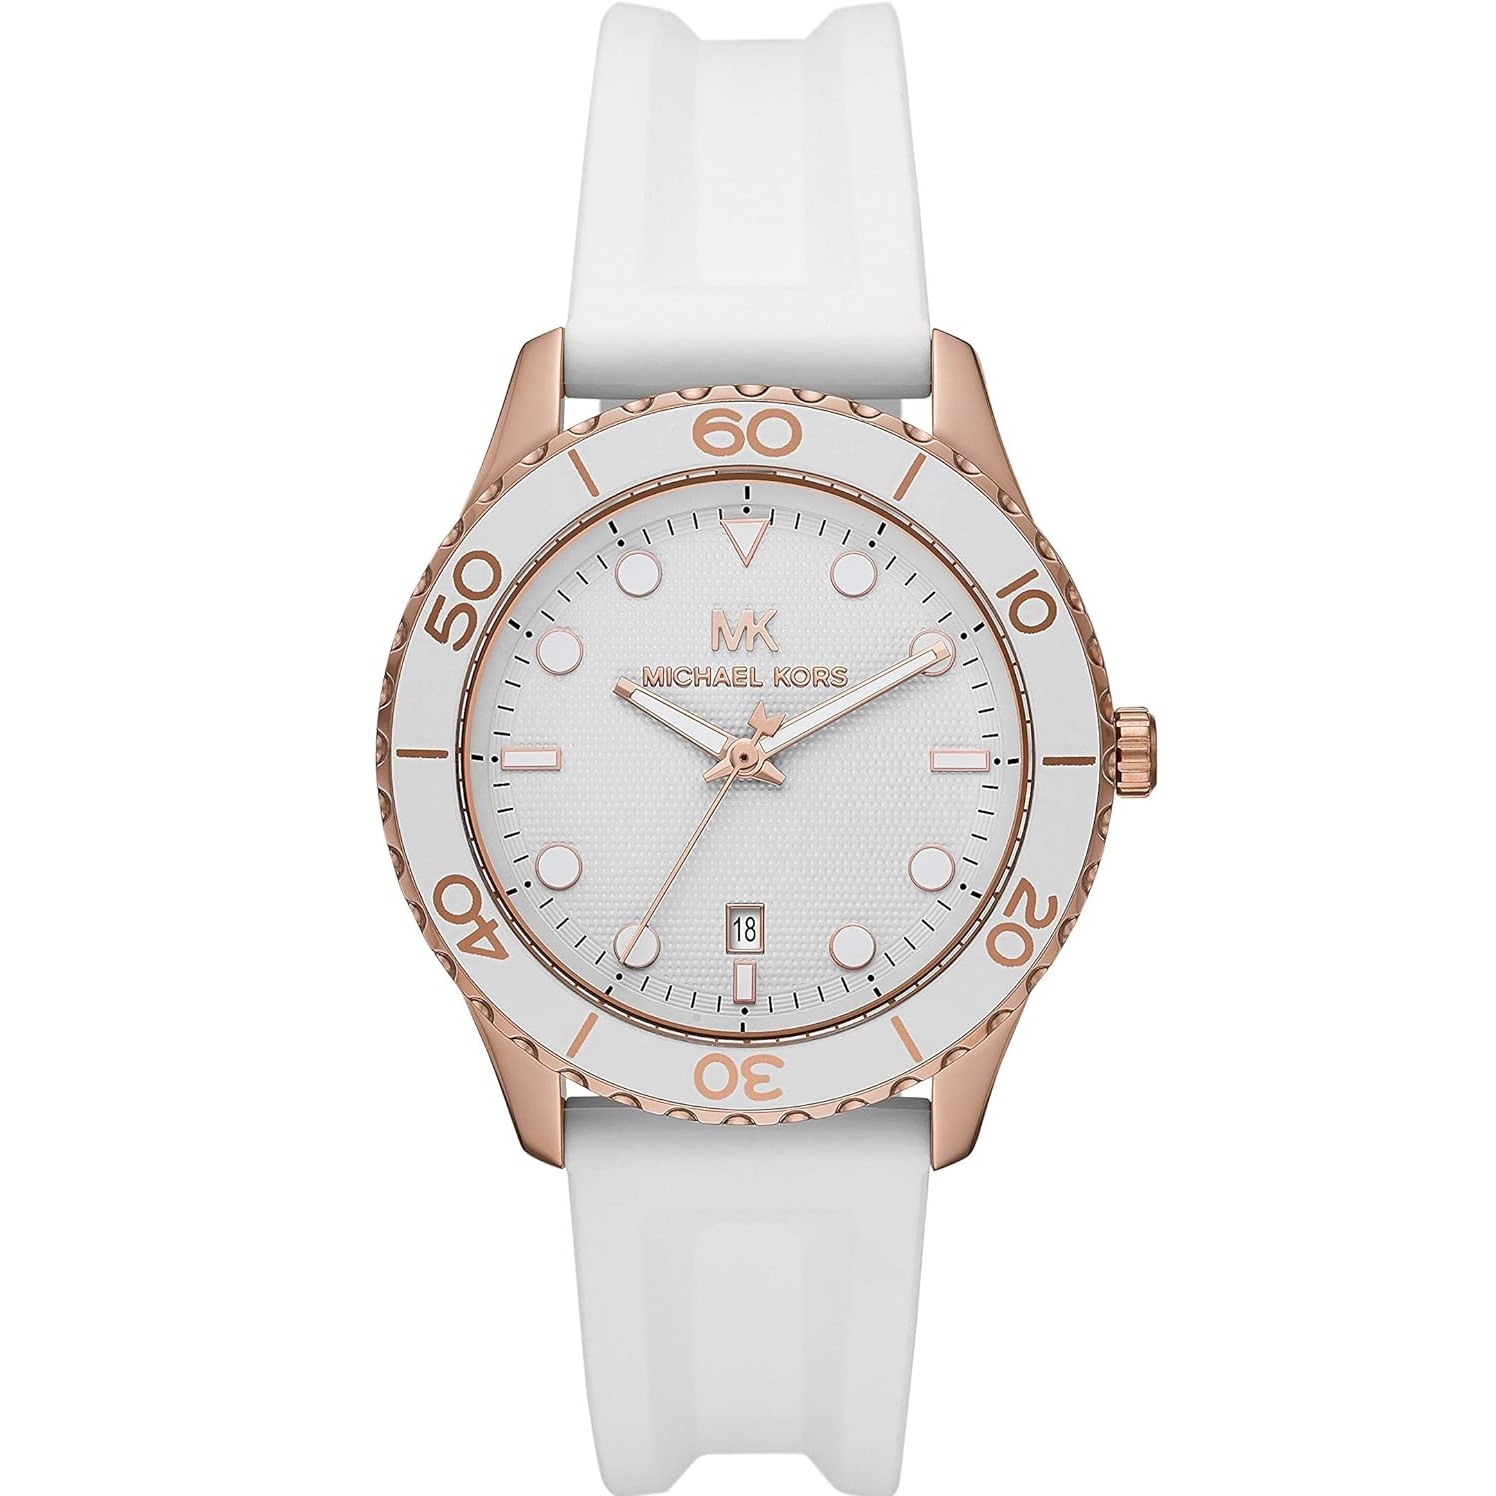 ĐỒNG HỒ MICHAEL KORS RUNWAY DIVE OVERSIZED ROSE GOLD-TONE SILICONE STRAP WATCH MK6853 6